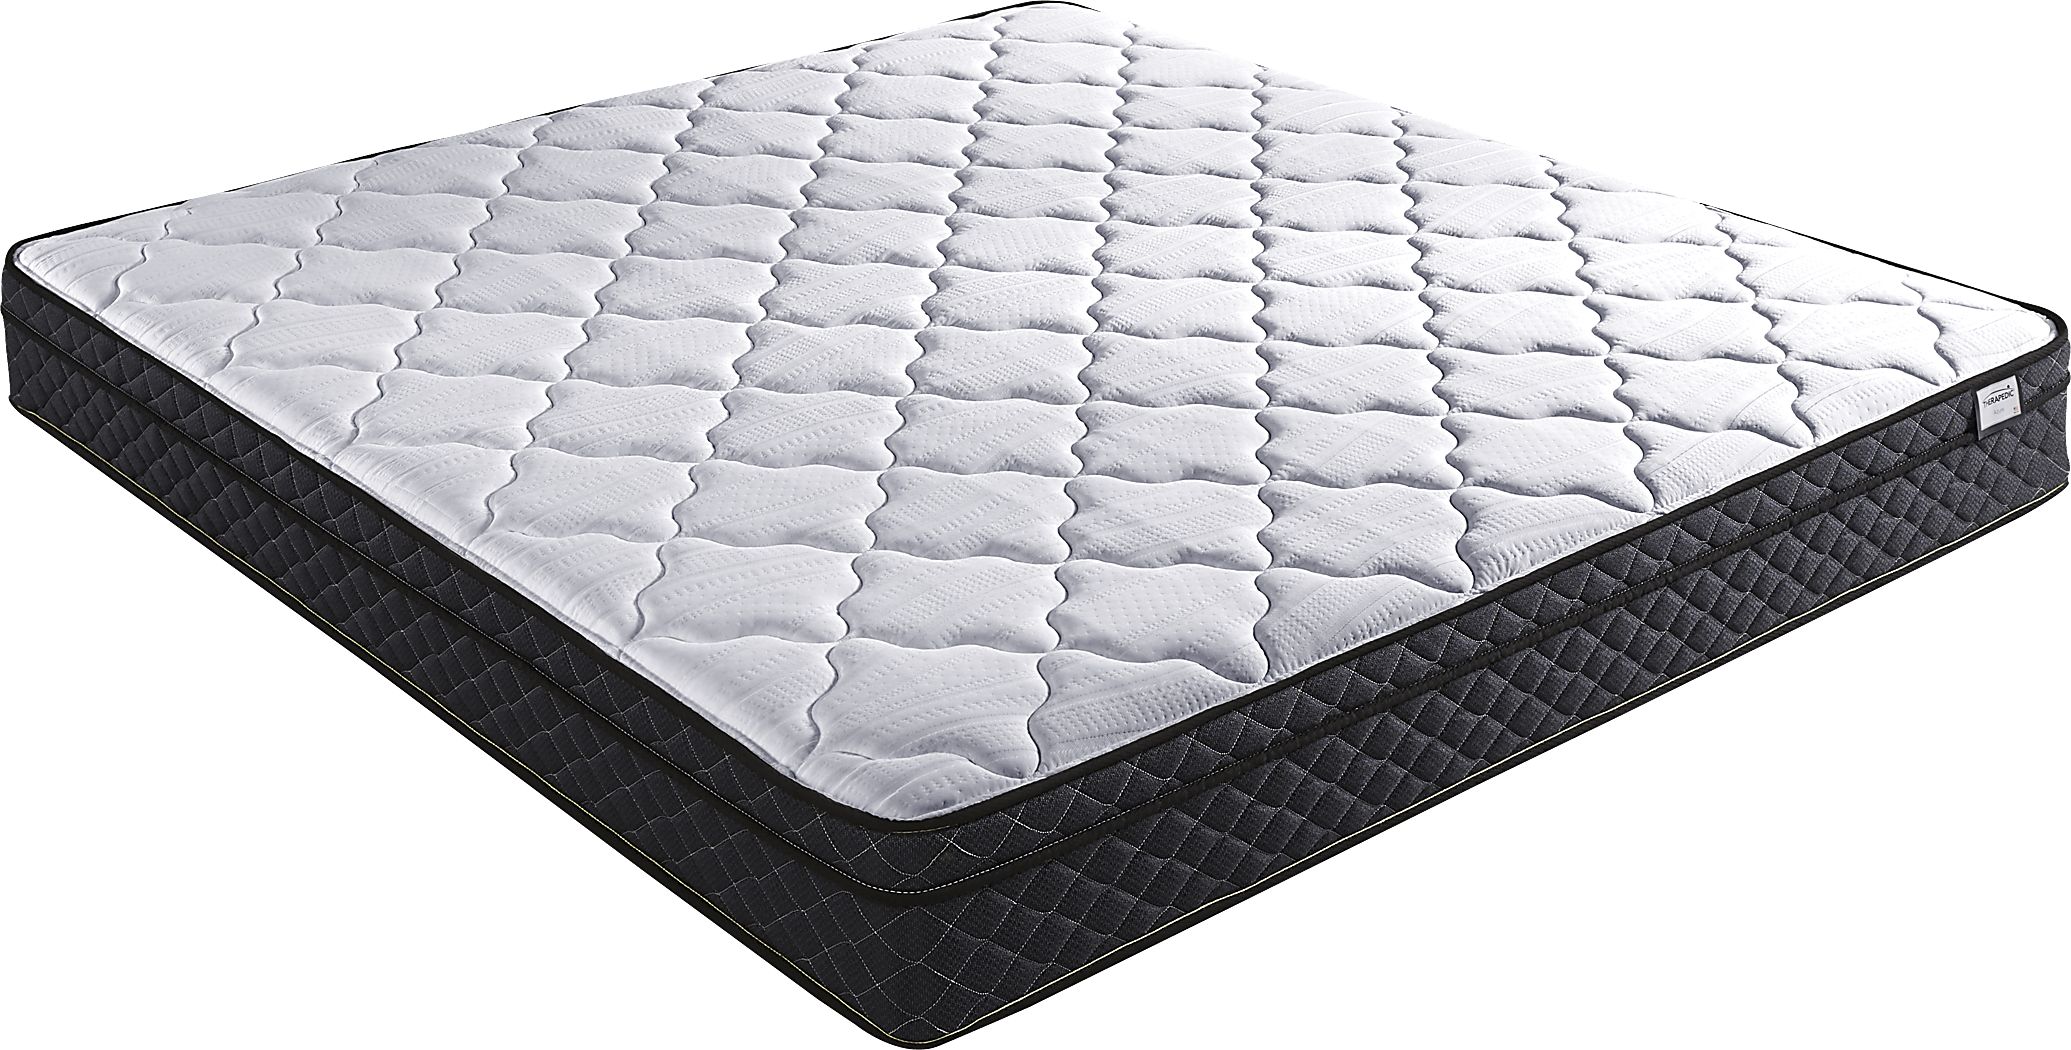 Top 98+ Striking therapedic azure mattress reviews Voted By The Construction Association